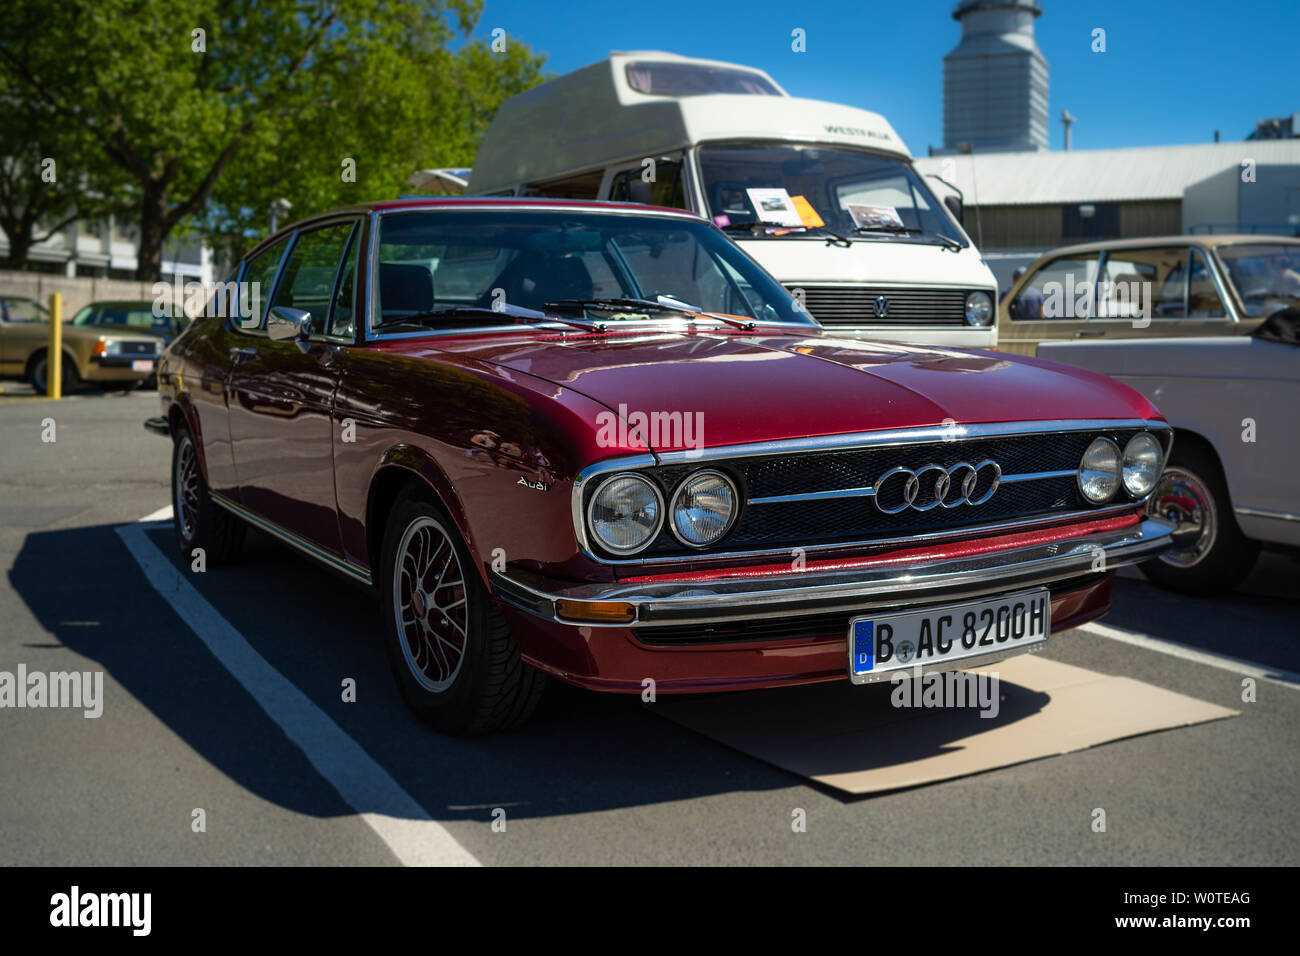 BERLIN - MAY 06, 2018: Sports car Audi 100 Coupe S, 1971. Oldtimertage Berlin-Brandenburg (31th Berlin-Brandenburg Oldtimer Day). Stock Photo